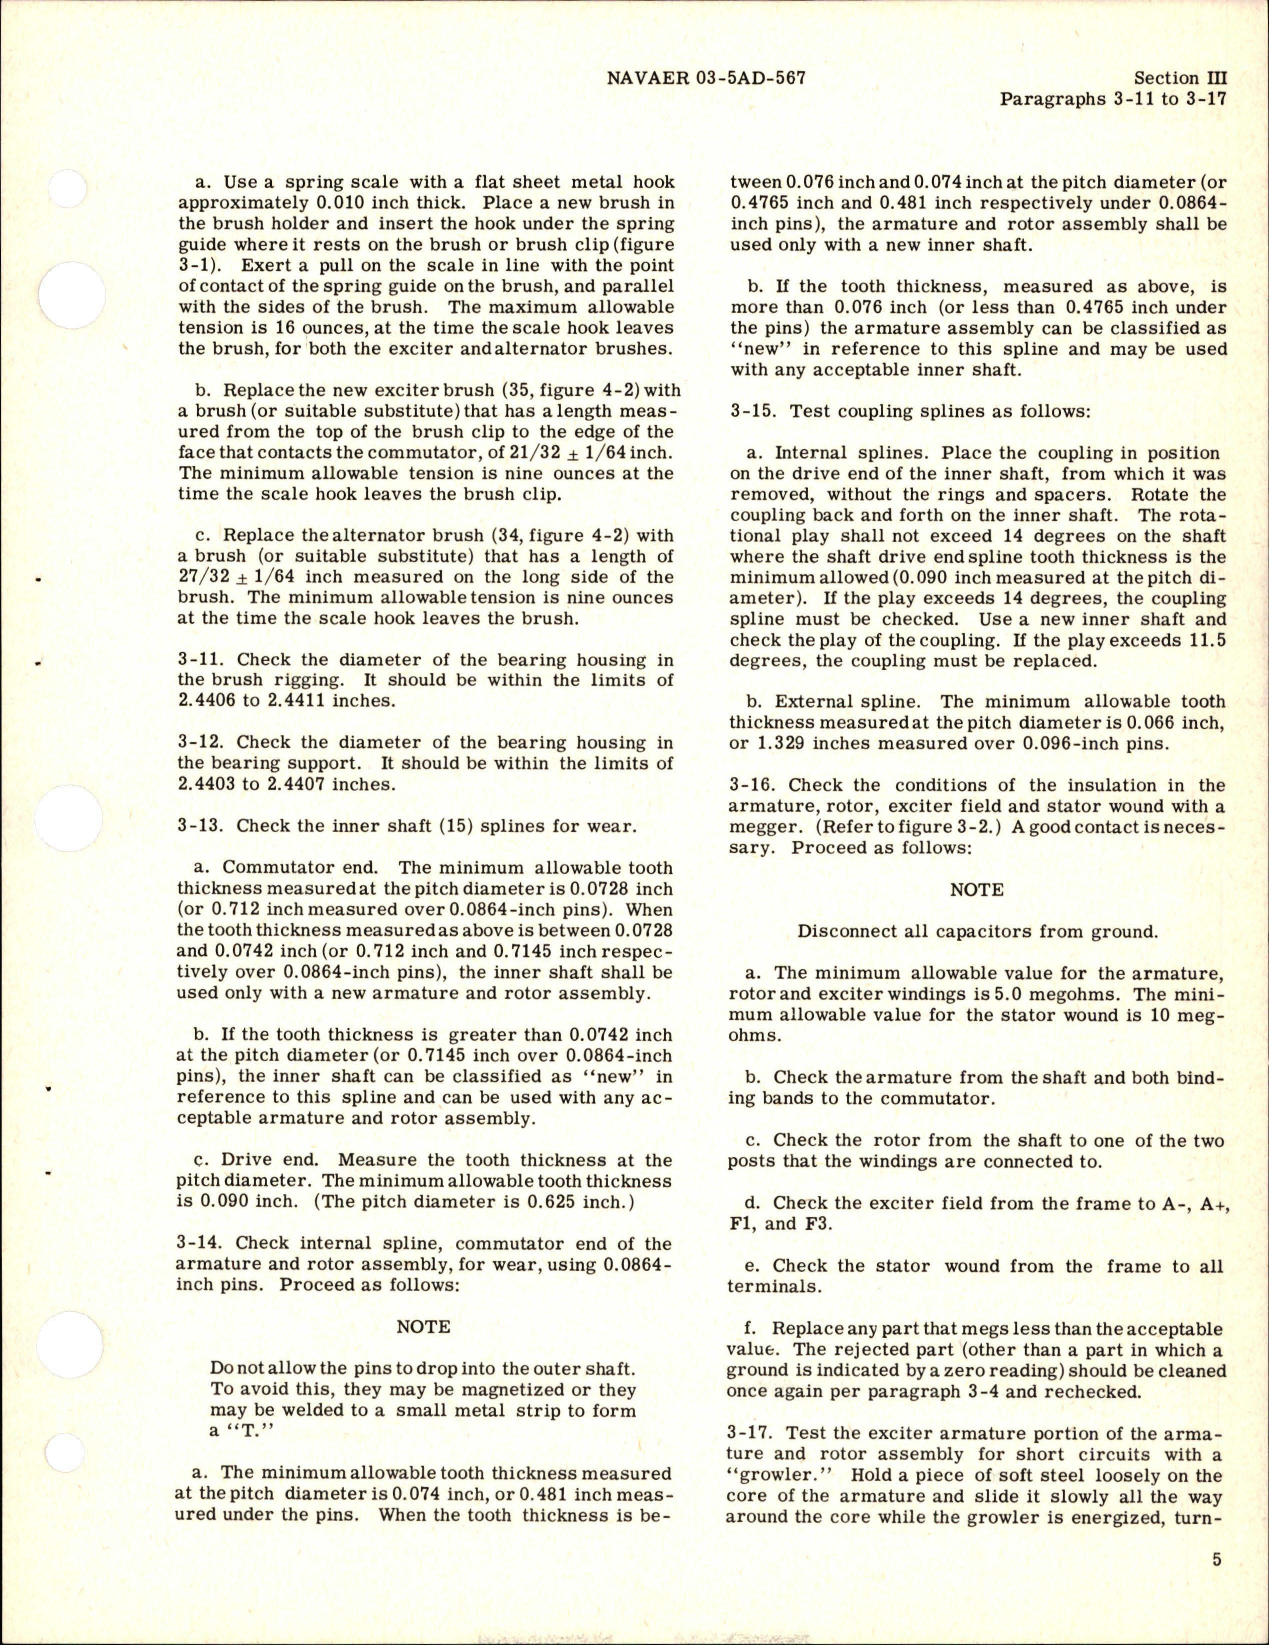 Sample page 9 from AirCorps Library document: Overhaul and Service Instructions for AC Generators 